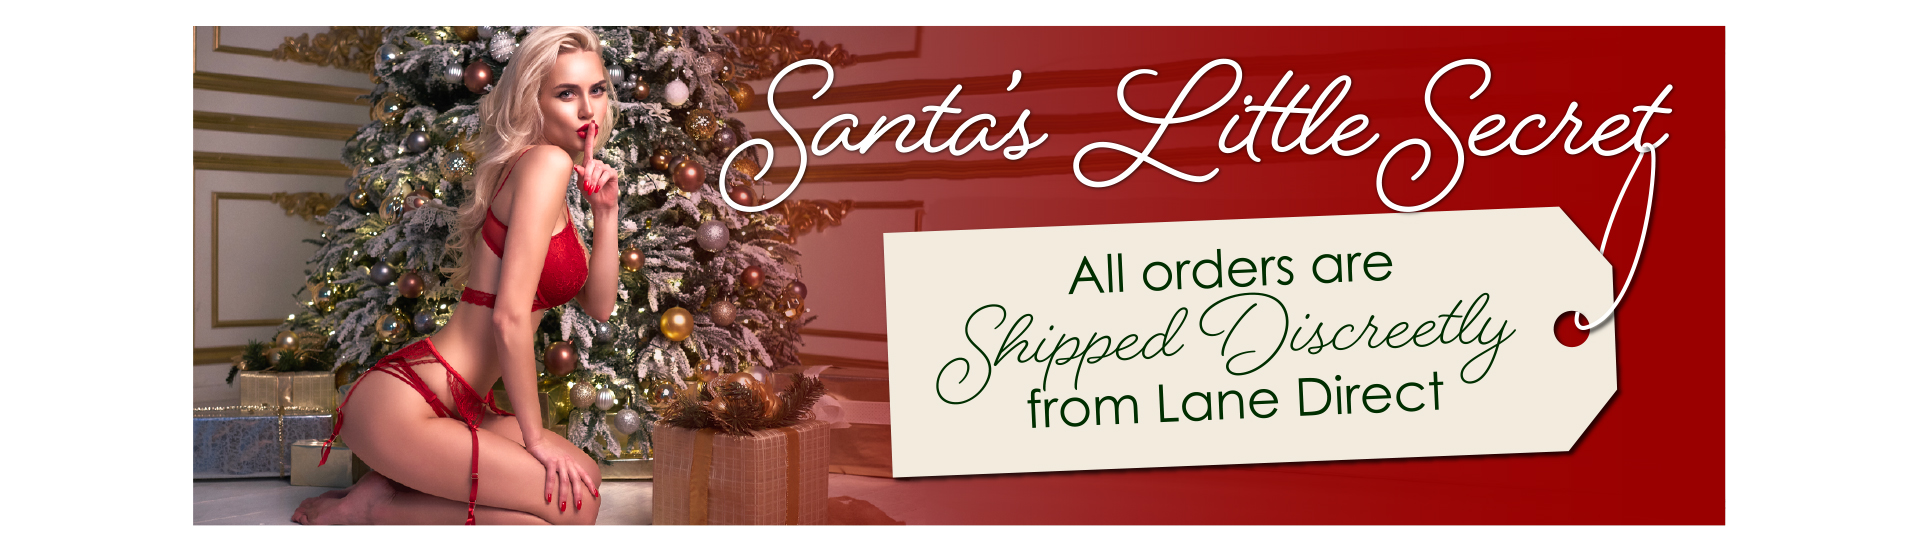 Santa's Little Secret - All orders are shipped discreetly from Lane Direct